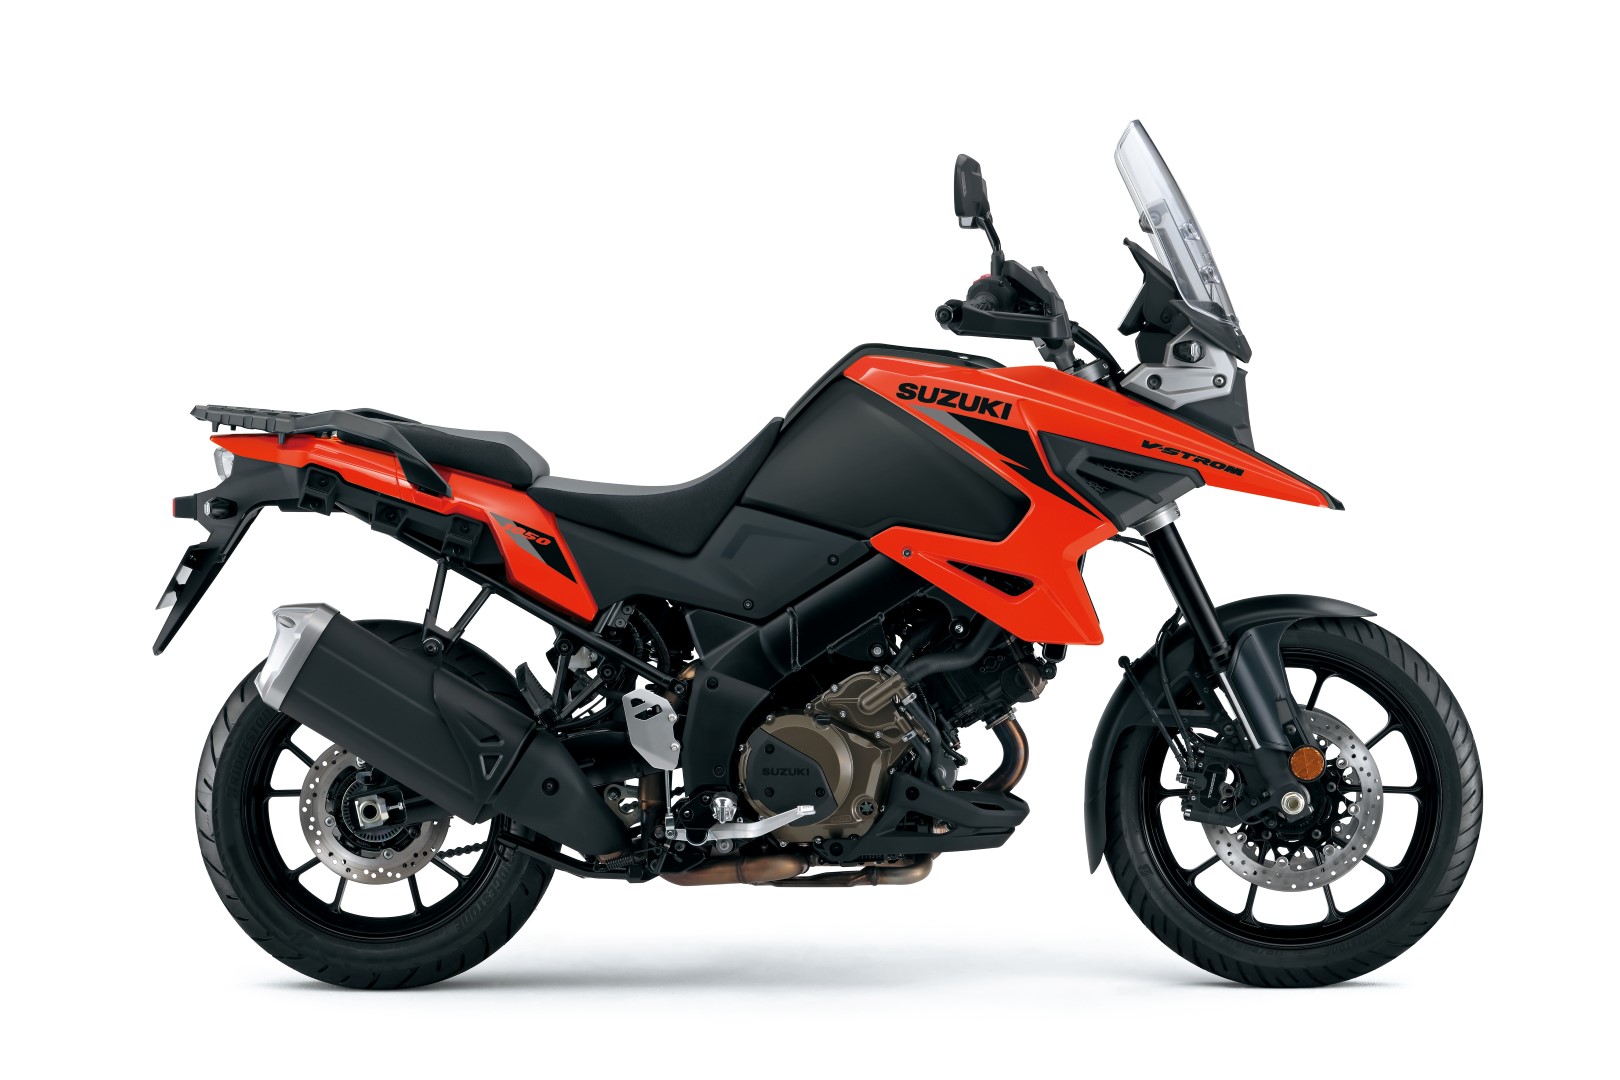 All-new Suzuki V-Strom 1050 now in Malaysia for RM78,800